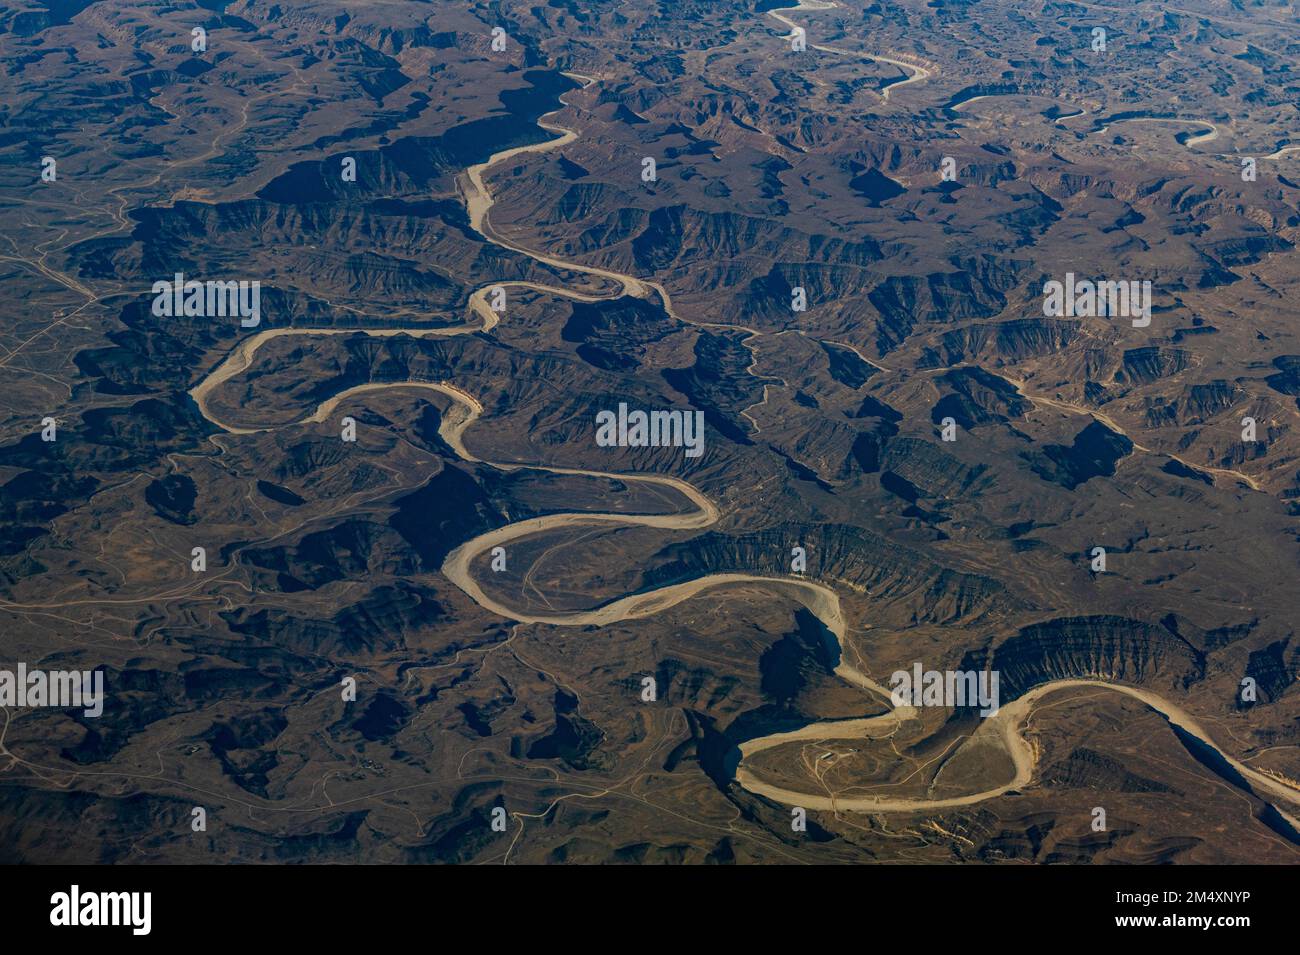 Oman, Dhofar Governorate, Aerial view of dry riverbed in winding canyon Stock Photo